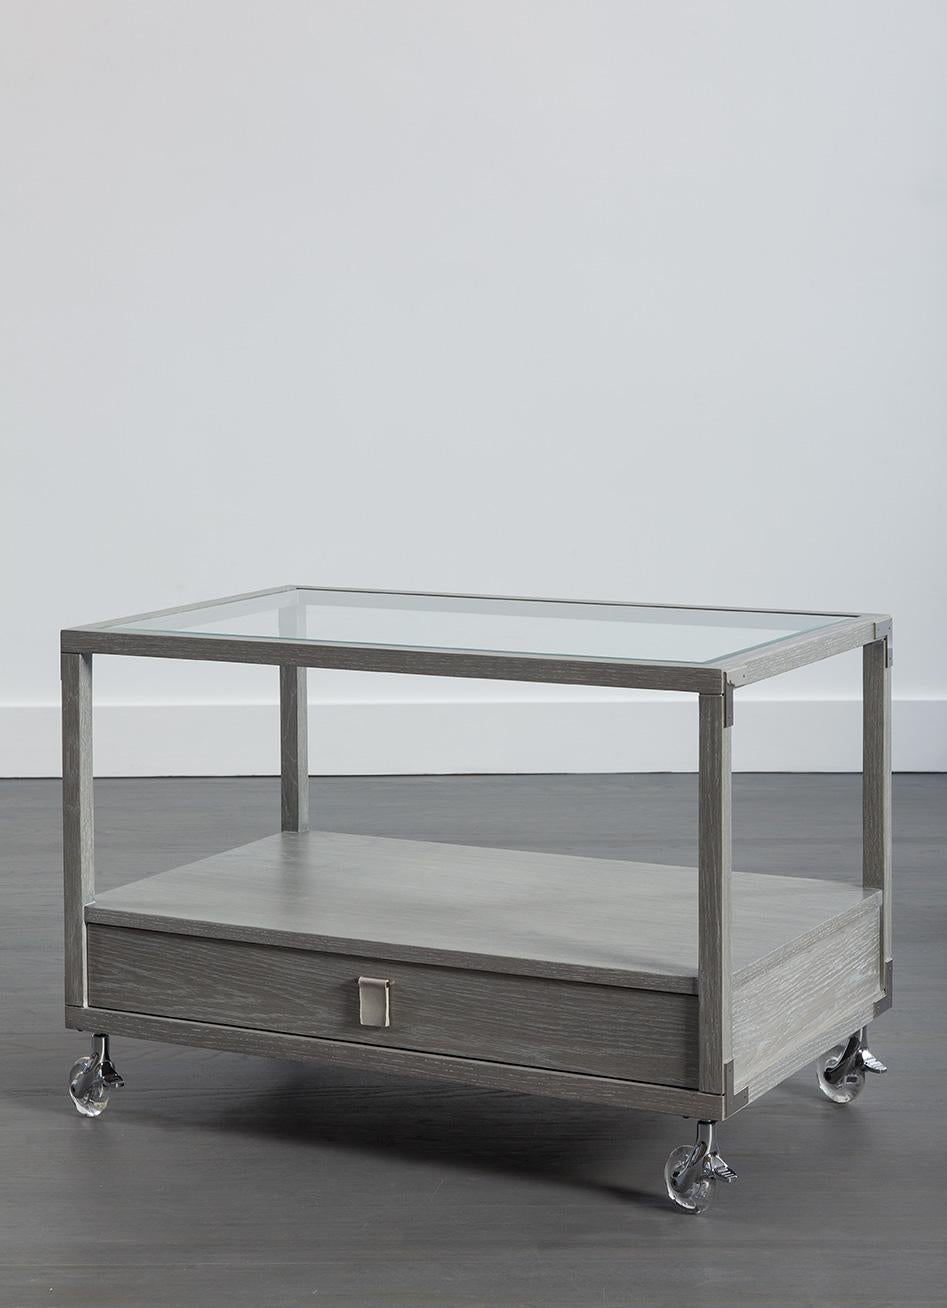 A very chic oak side table on lucite wheels with glass top and drawer is a perfect accompaniment to your sofa or armchairs. The added flexibility of wheels allows you to shift the table as appropriate to your room, including your bedroom where this